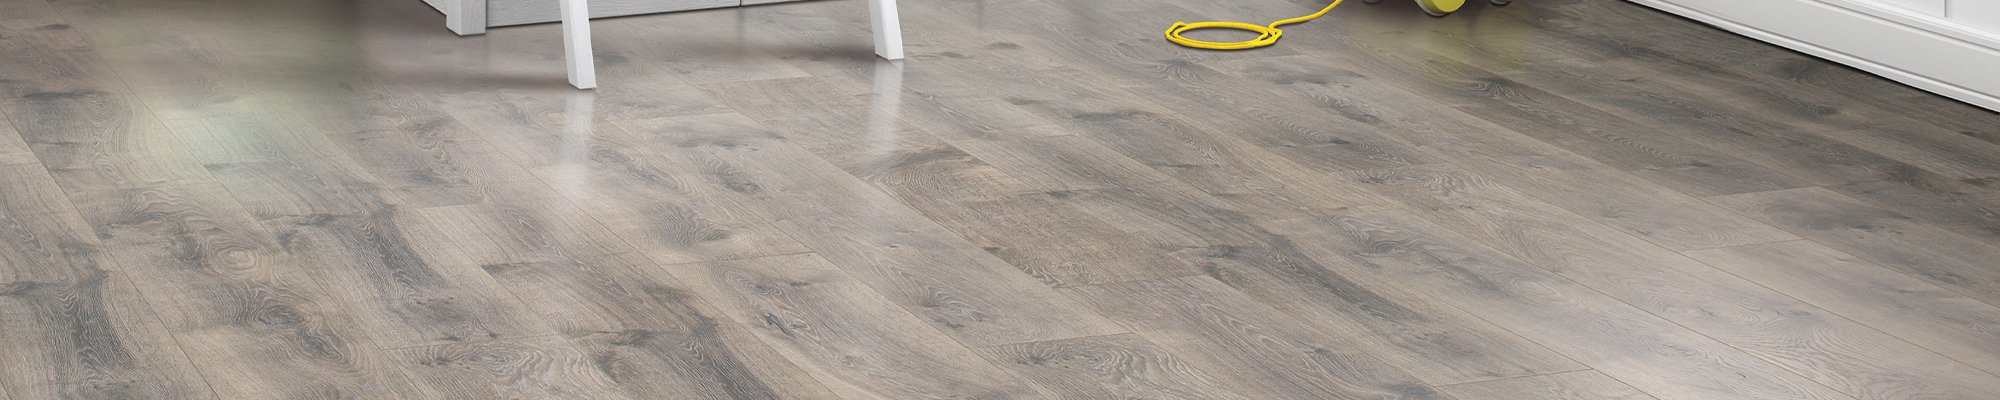 Laminate is durable, affordable and attractive. Laminate wood floors look exactly like real wood at a fraction of the price.